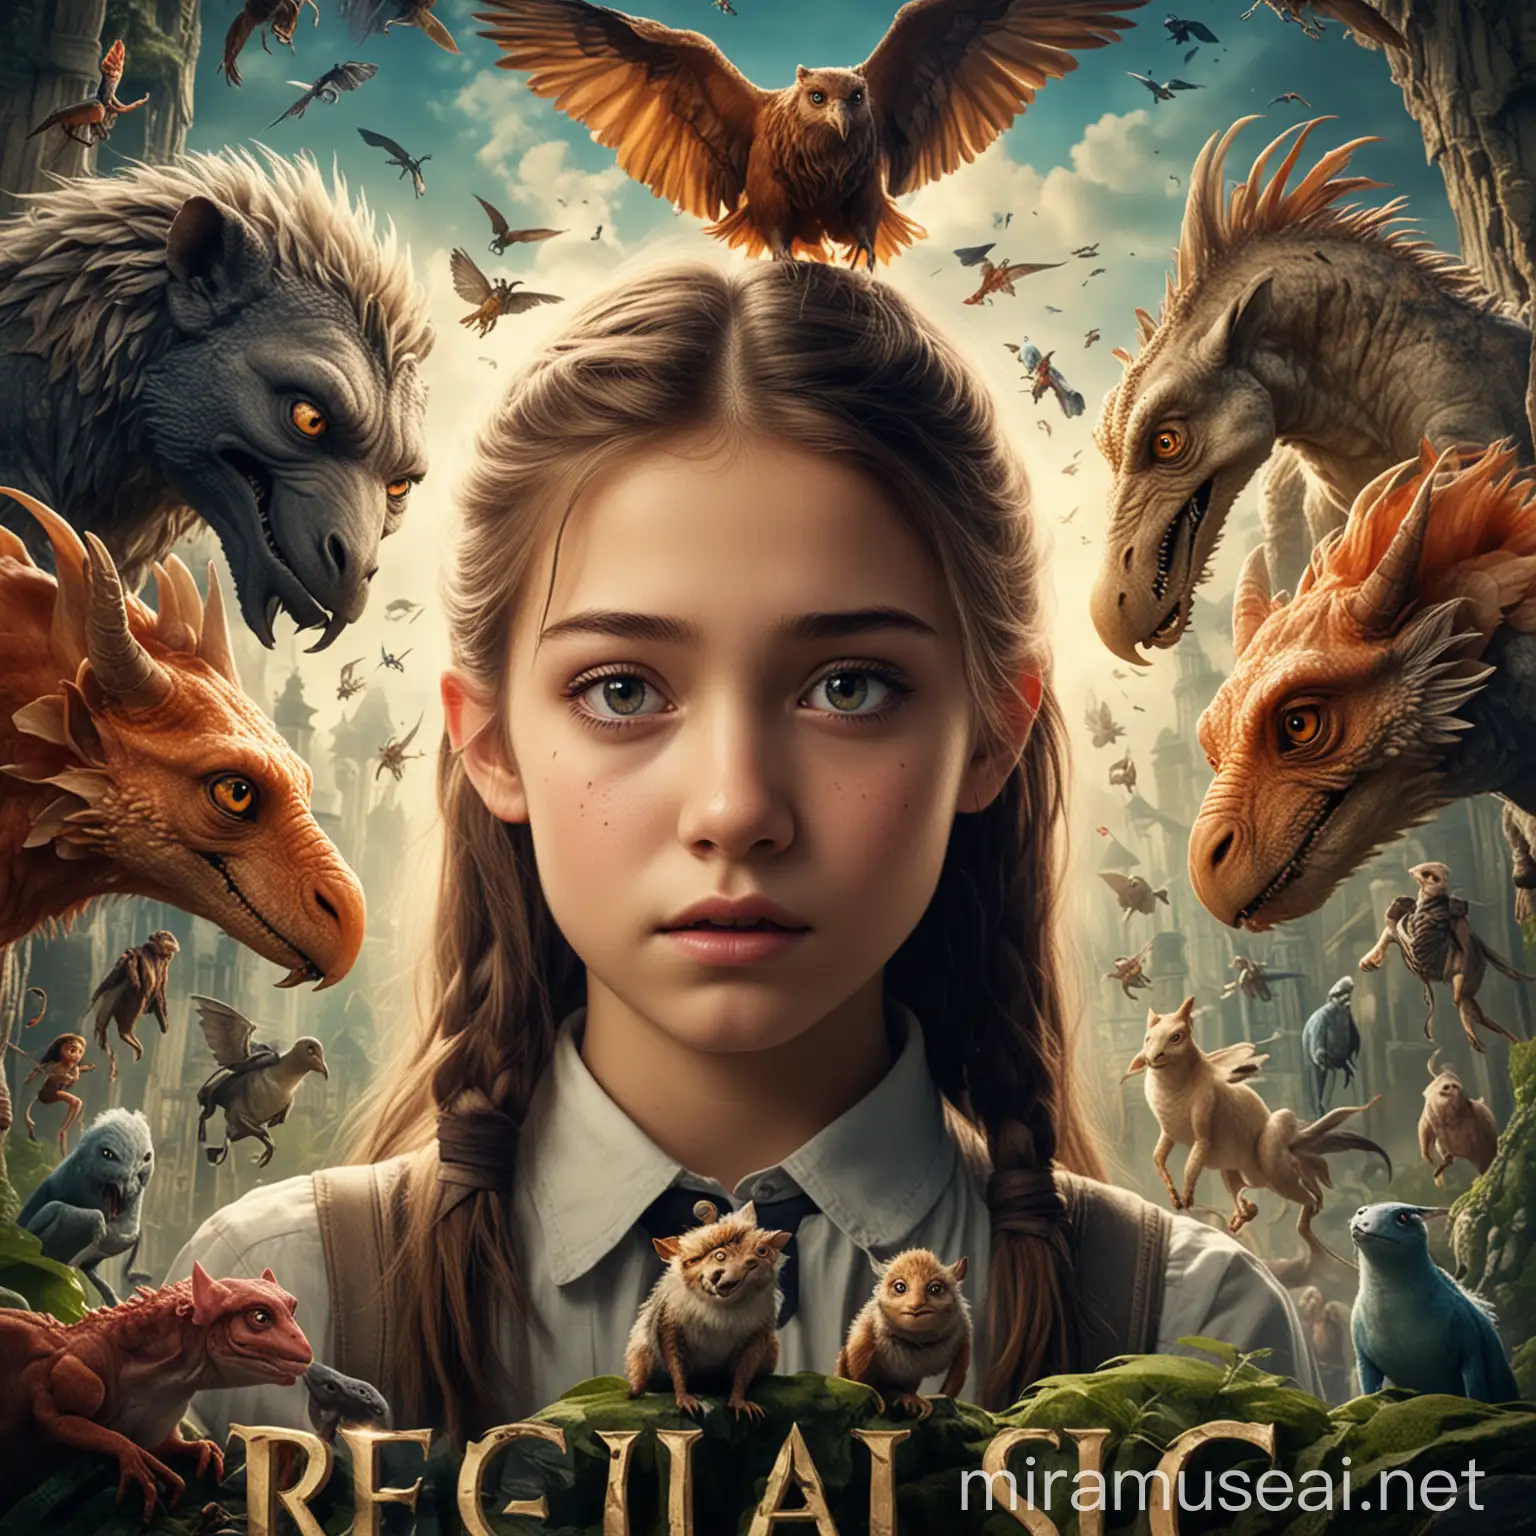 Realistic Teenager Fantasy Movie Poster with Diverse Creatures and Tension in the Air